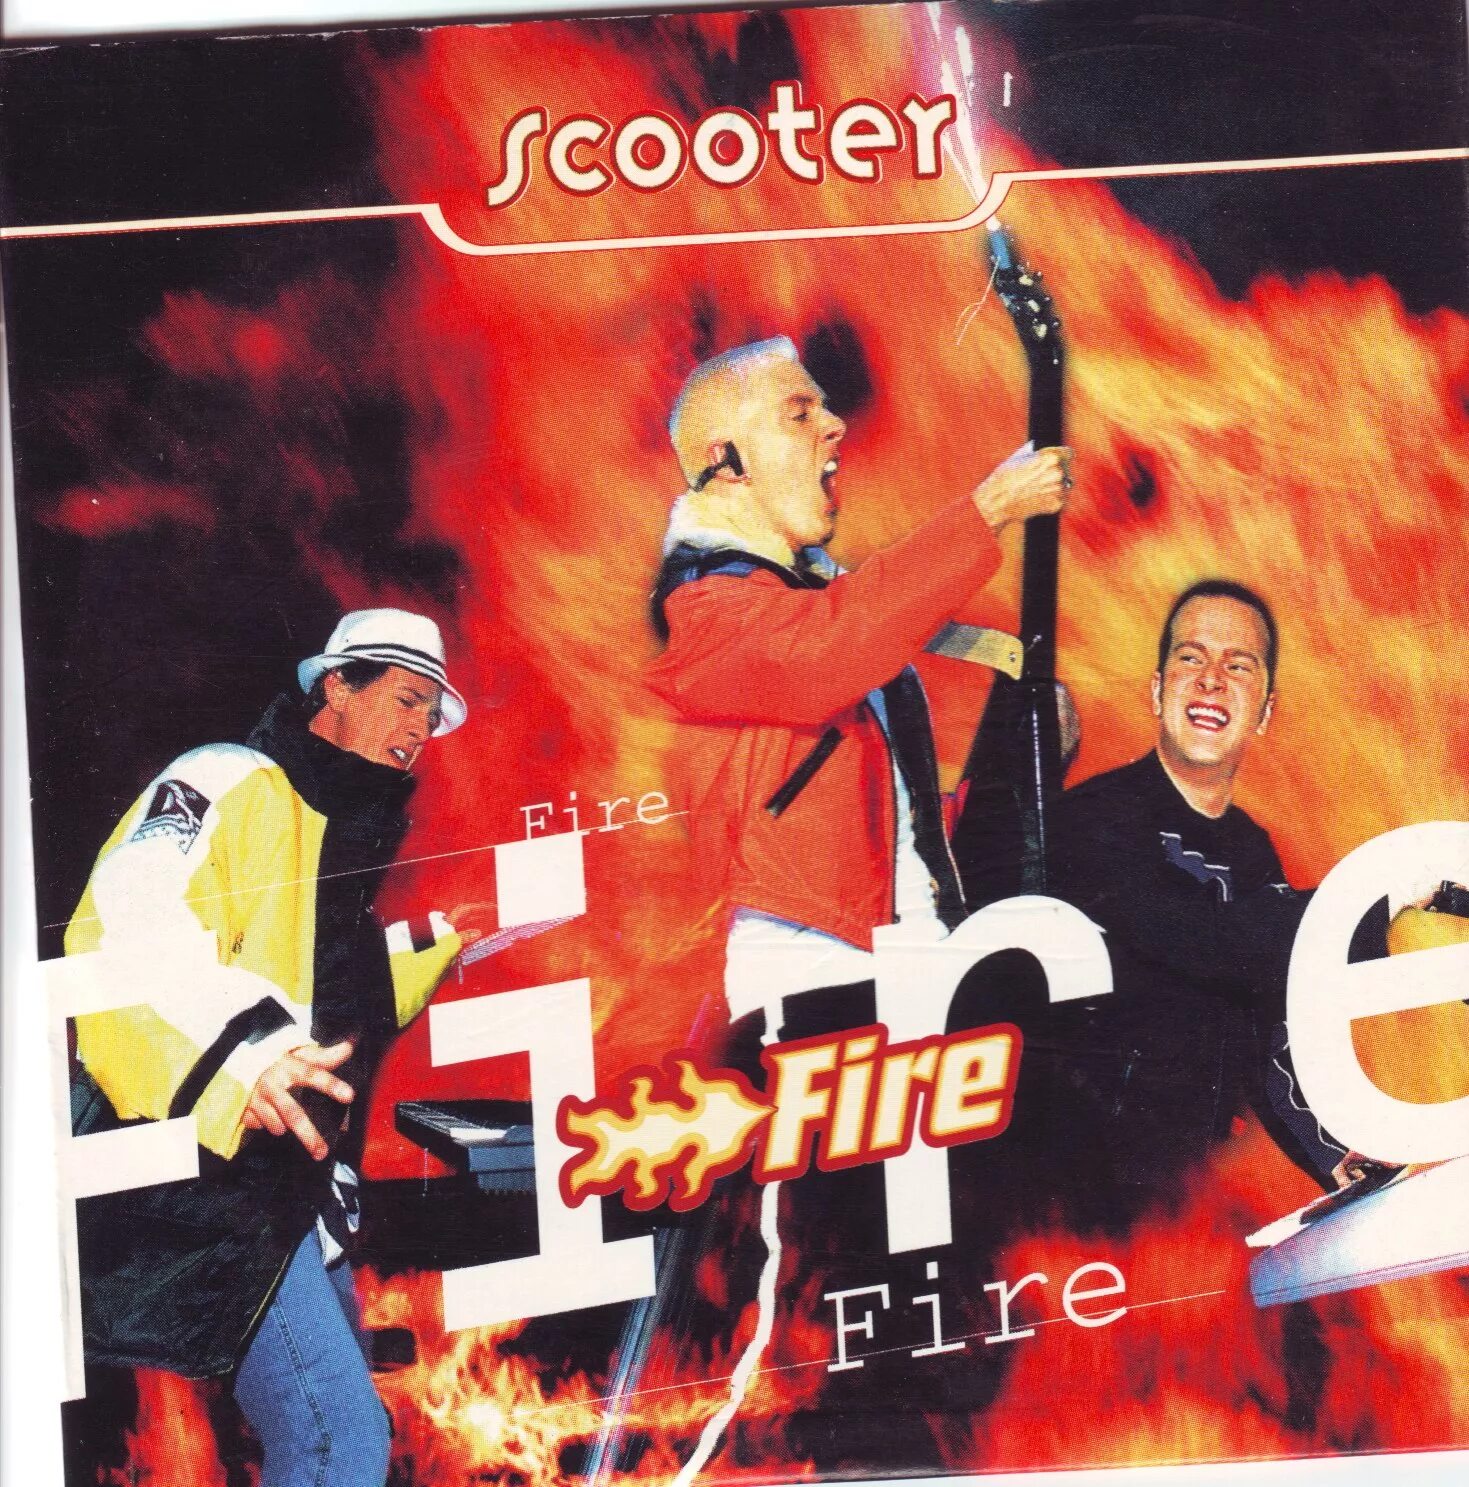 Scooter Fire Single. Scooter Fire 1997. Scooter синглы. Scooter 90-е Fire.